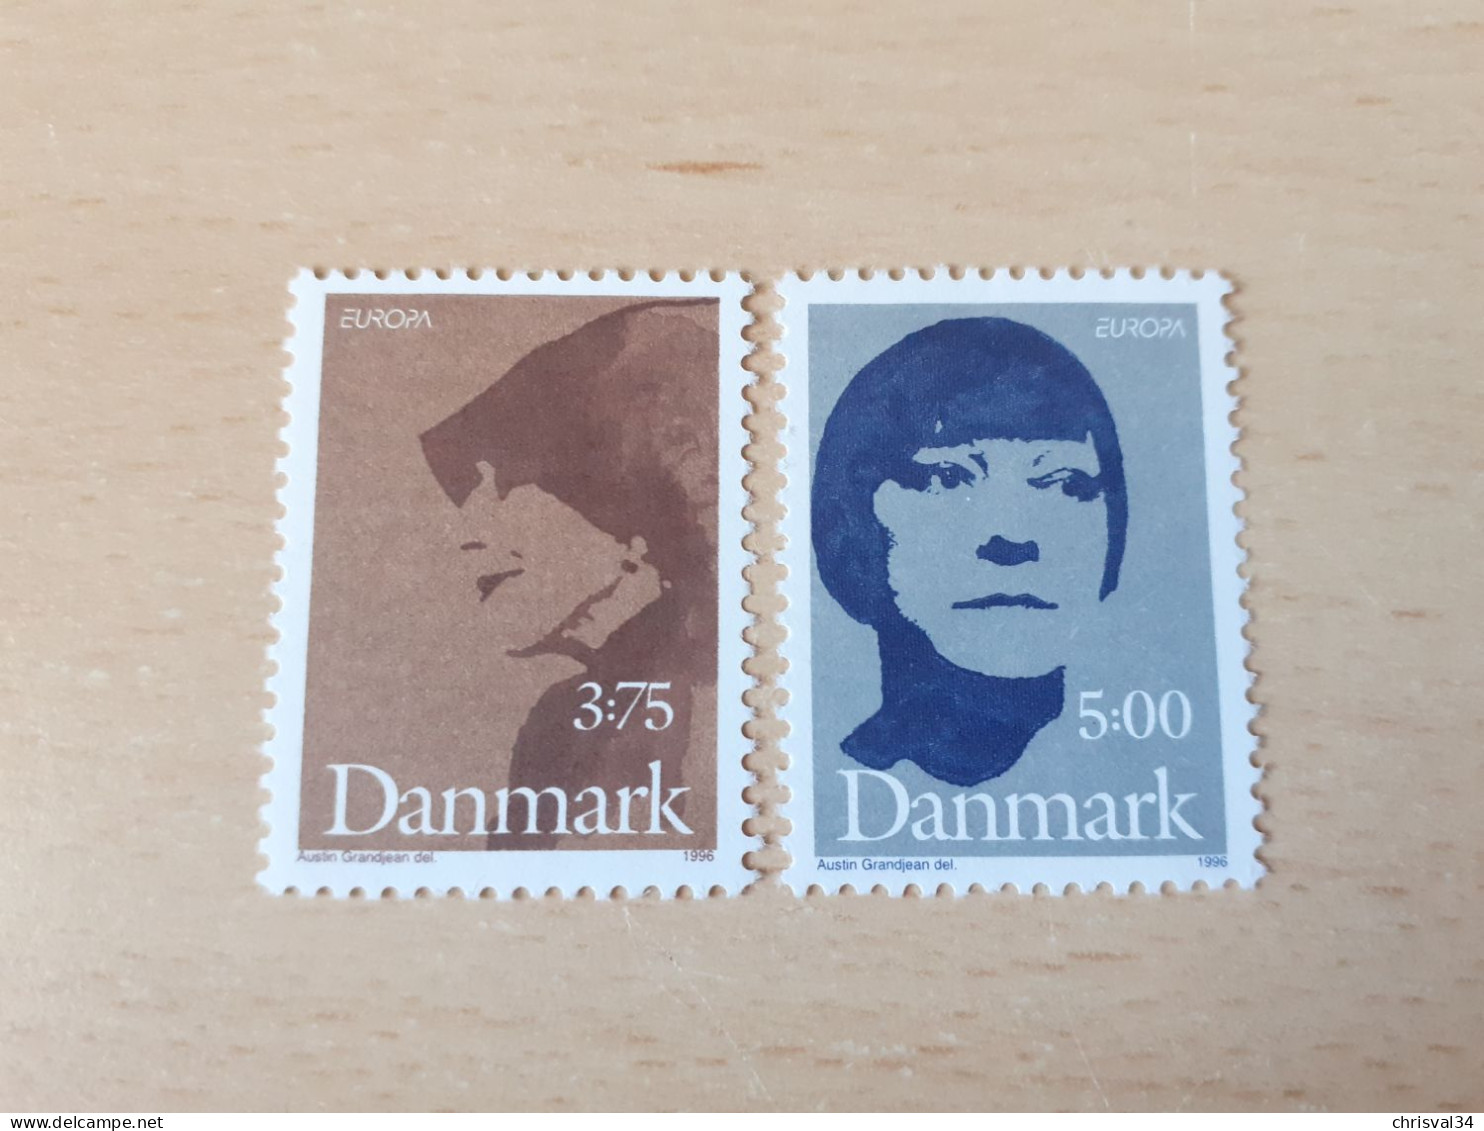 TIMBRES   DANEMARK    ANNEE  1996     N  1128  /  1129    COTE  4,00  EUROS   NEUFS  LUXE** - Unused Stamps